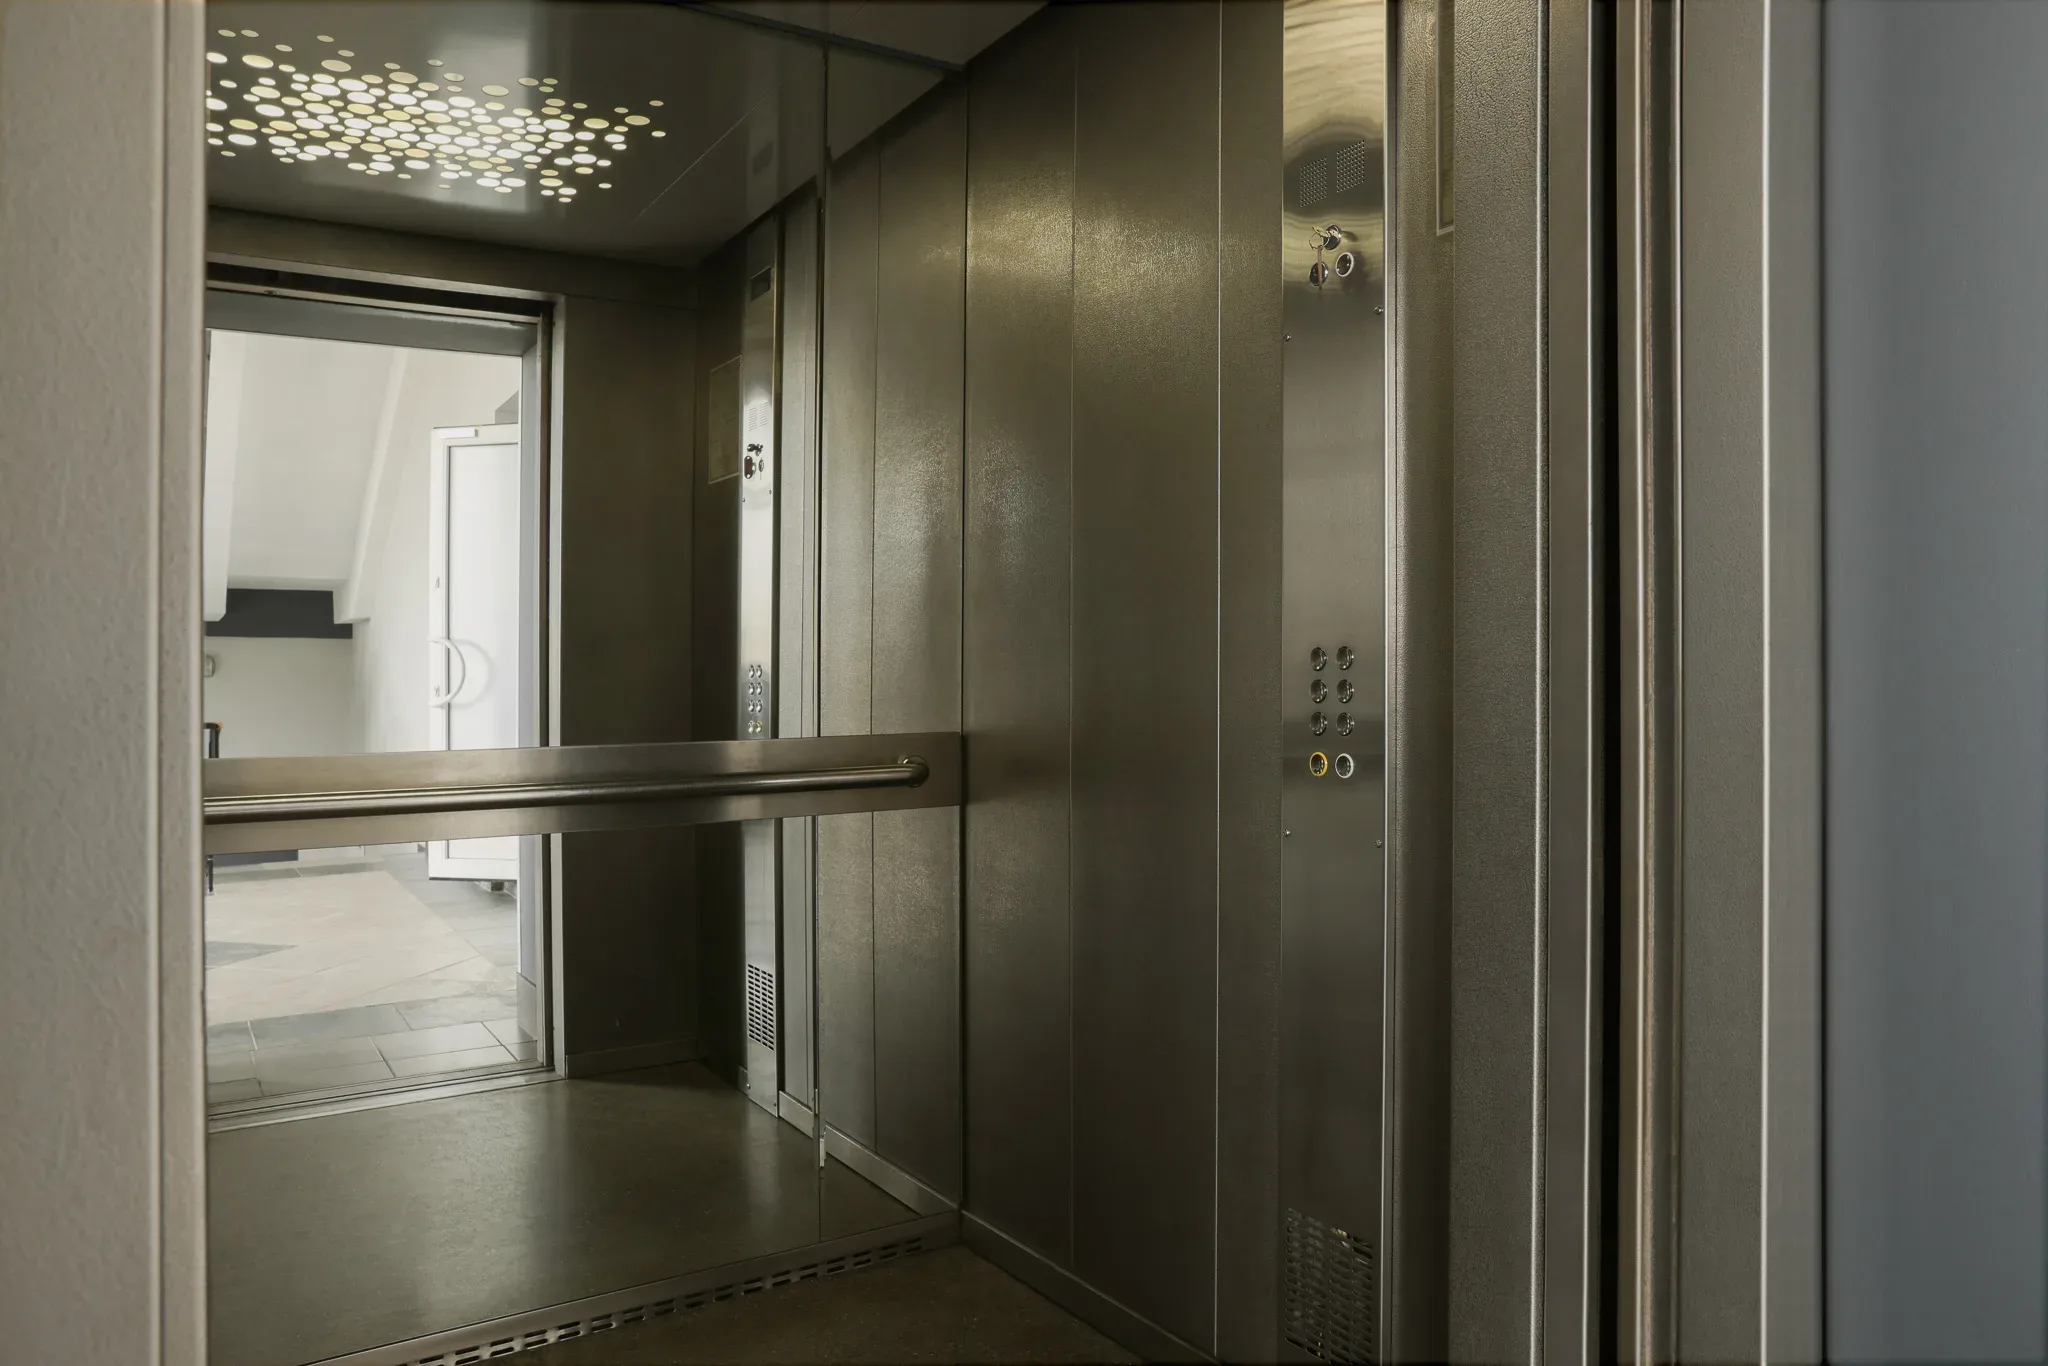 A 3d model of an elevator in a building.